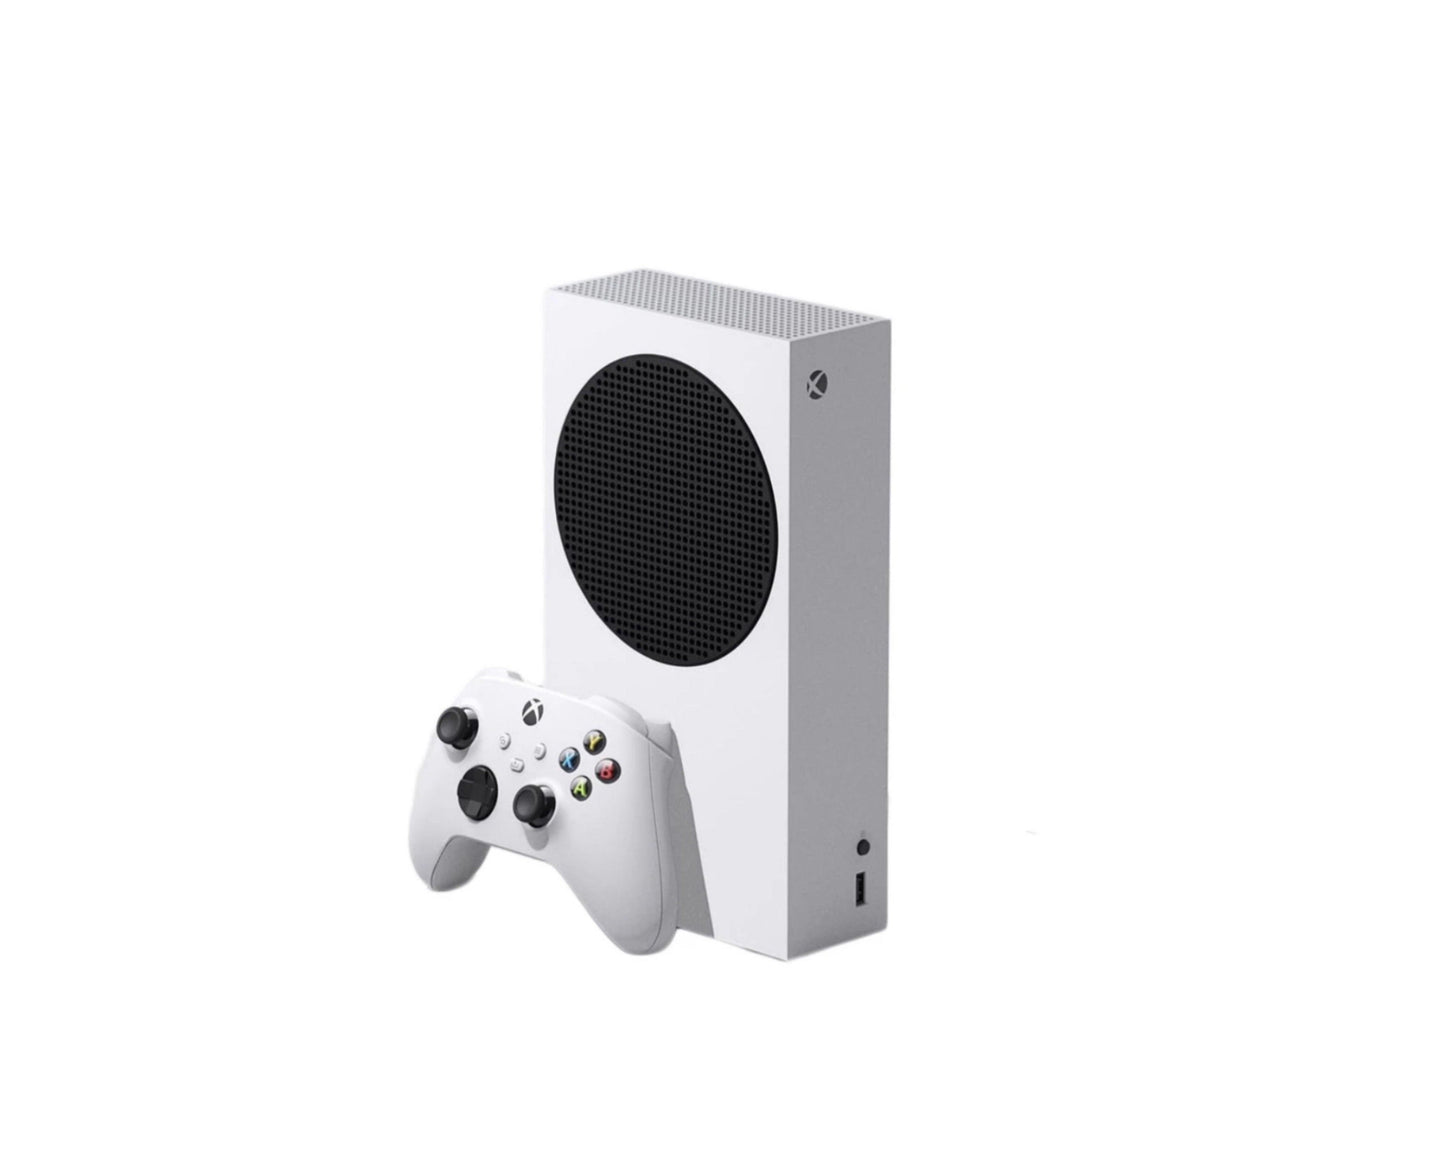 Microsoft Xbox Series S US Plug White - Only at www.BallersClubKickz.com - The Microsoft Xbox Series S is the latest version of the Xbox console by Microsoft. The Xbox Series S released on November 10th, 2020. The retail price is $299 compared to the Xbox Series X which retails for $499. Pre-orders for the console sold out within minutes! The Xbox Series S is likely to be one of the hottest consoles Microsoft has ever released.